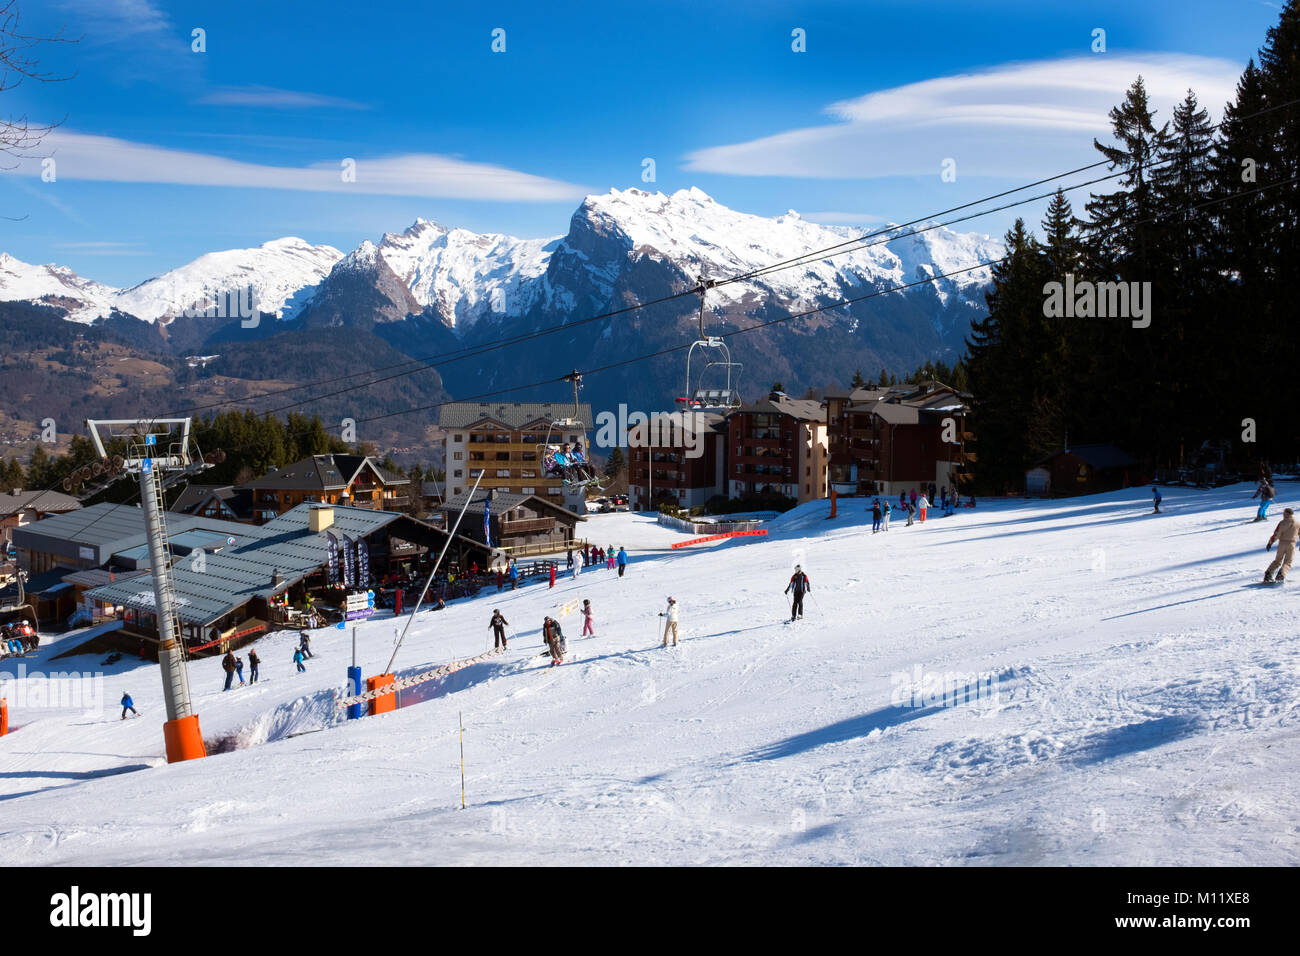 View of Skiers from the chair lift on a Sunny ski piste Samoens France Stock Photo